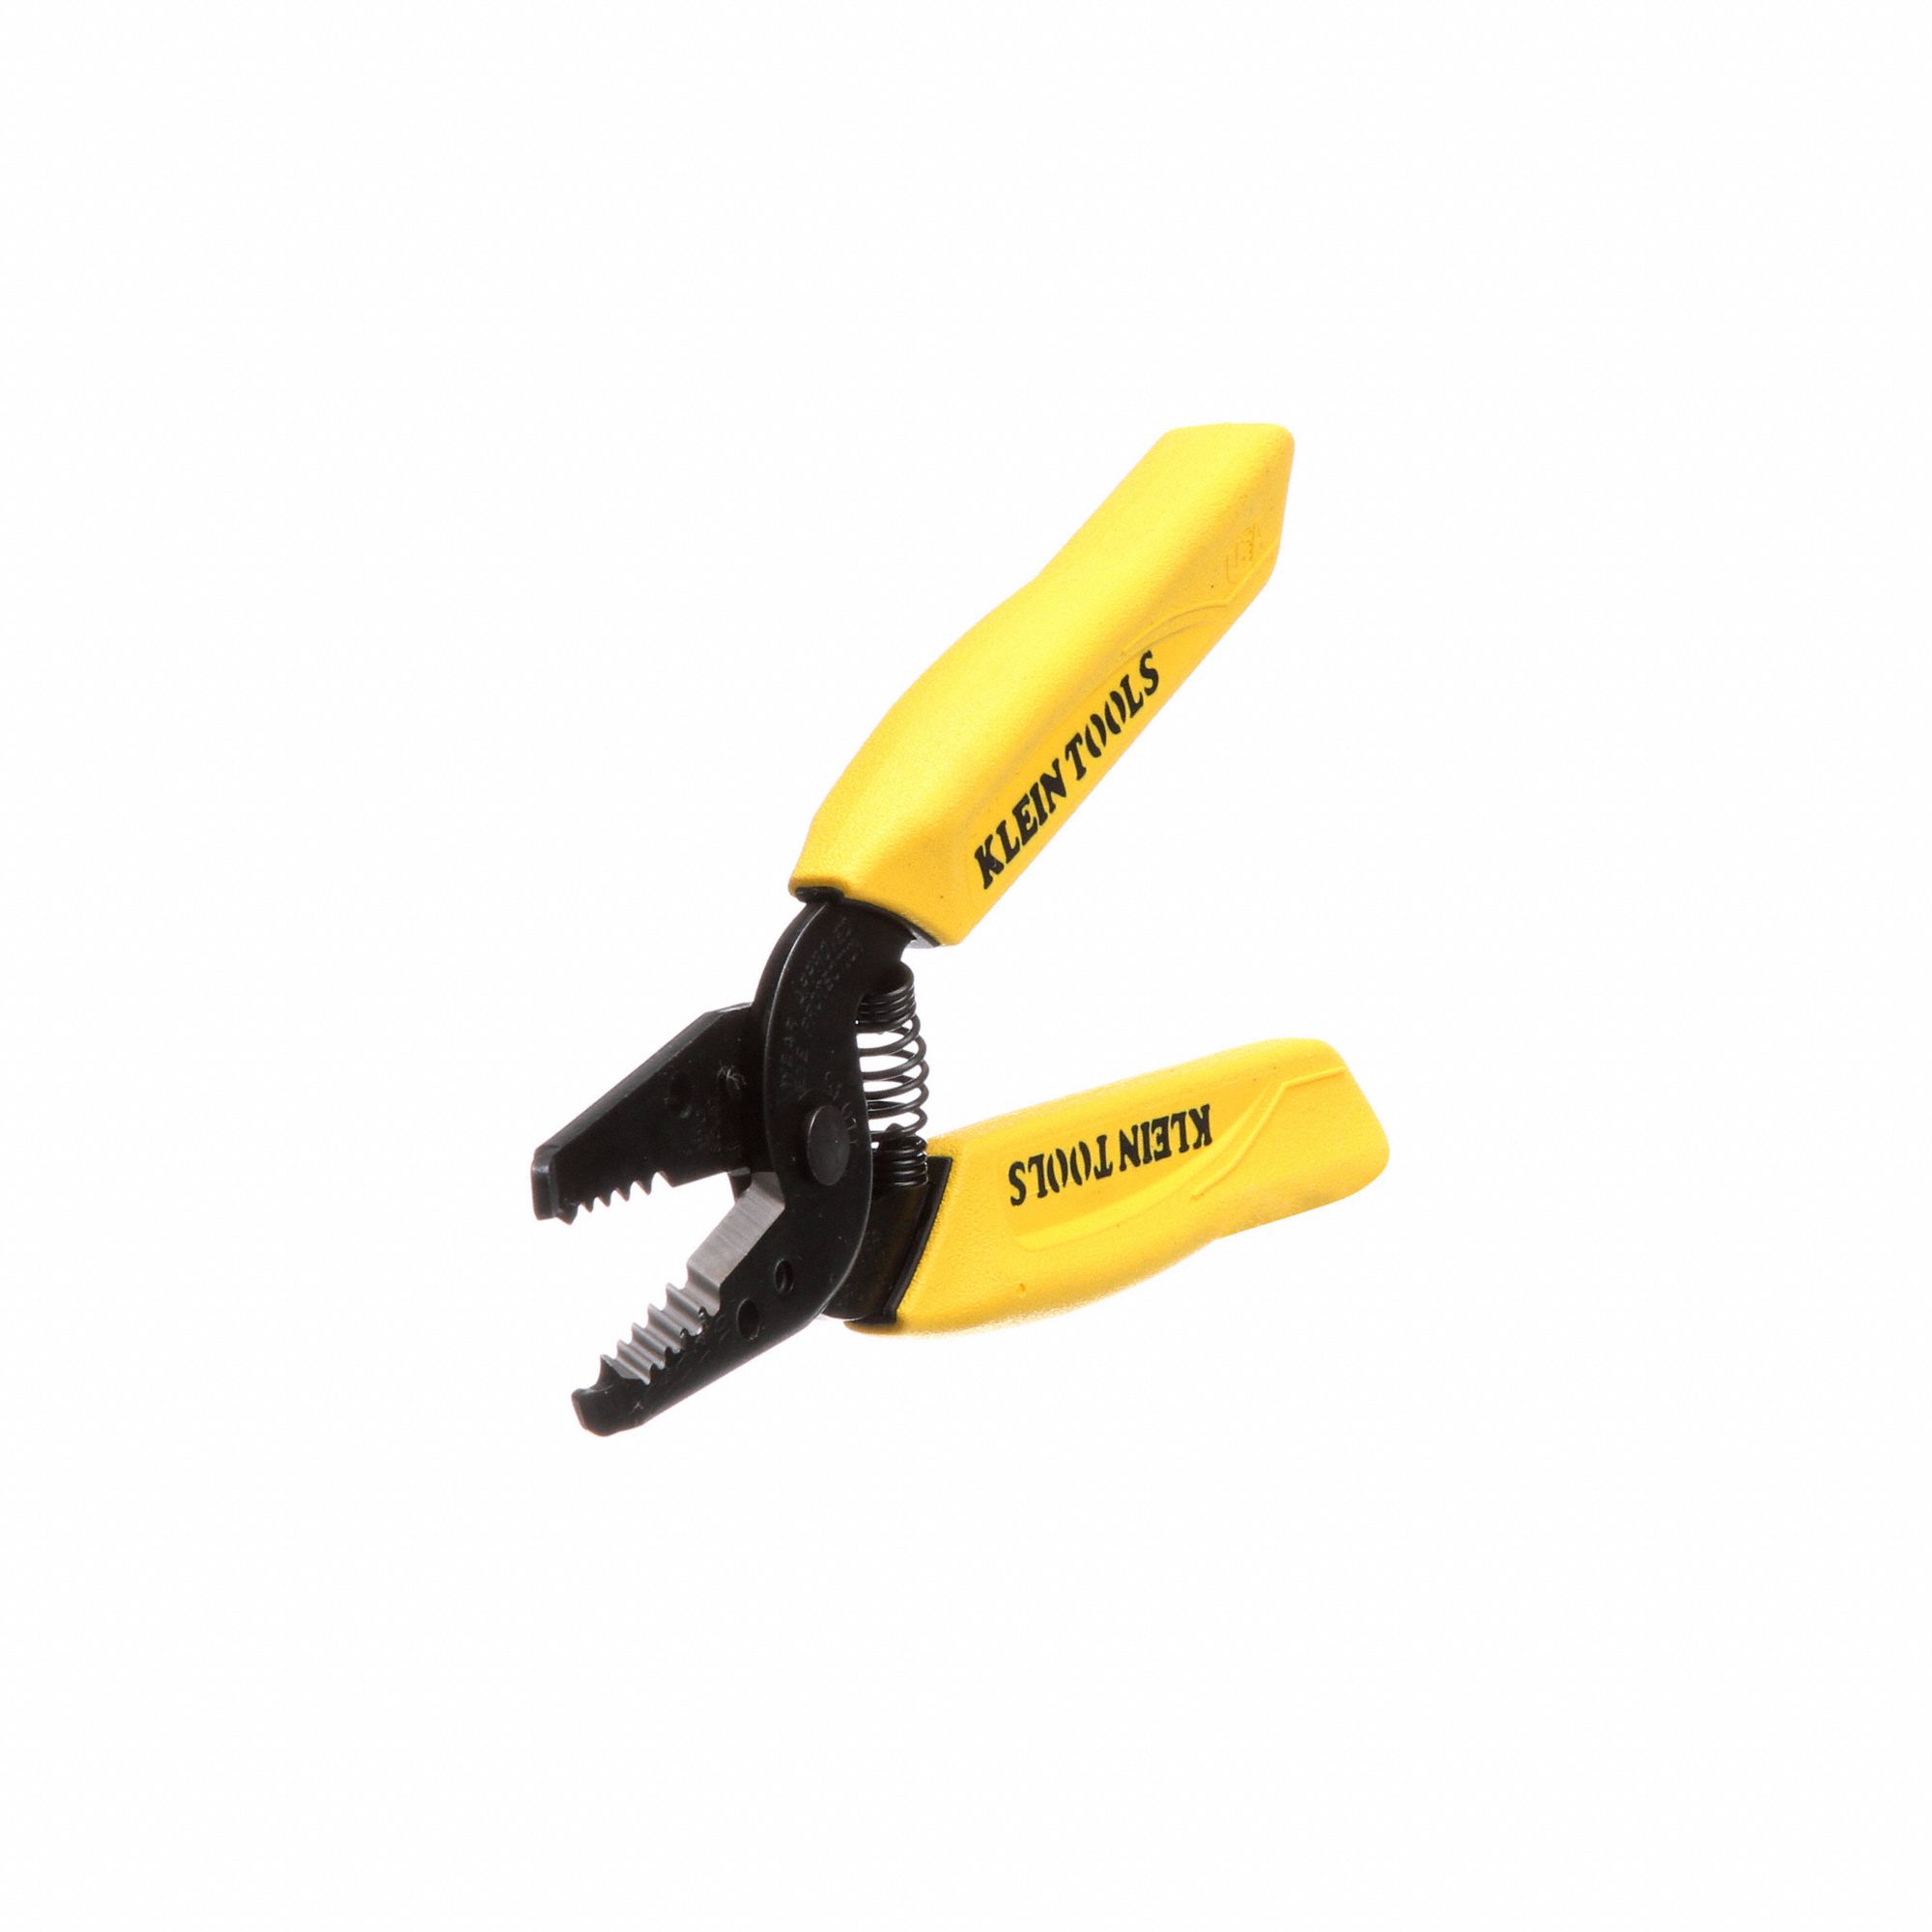 Klein Tools Electrical Wire Stripper/Cutter (10-18 AWG Solid) 11045 - The  Home Depot